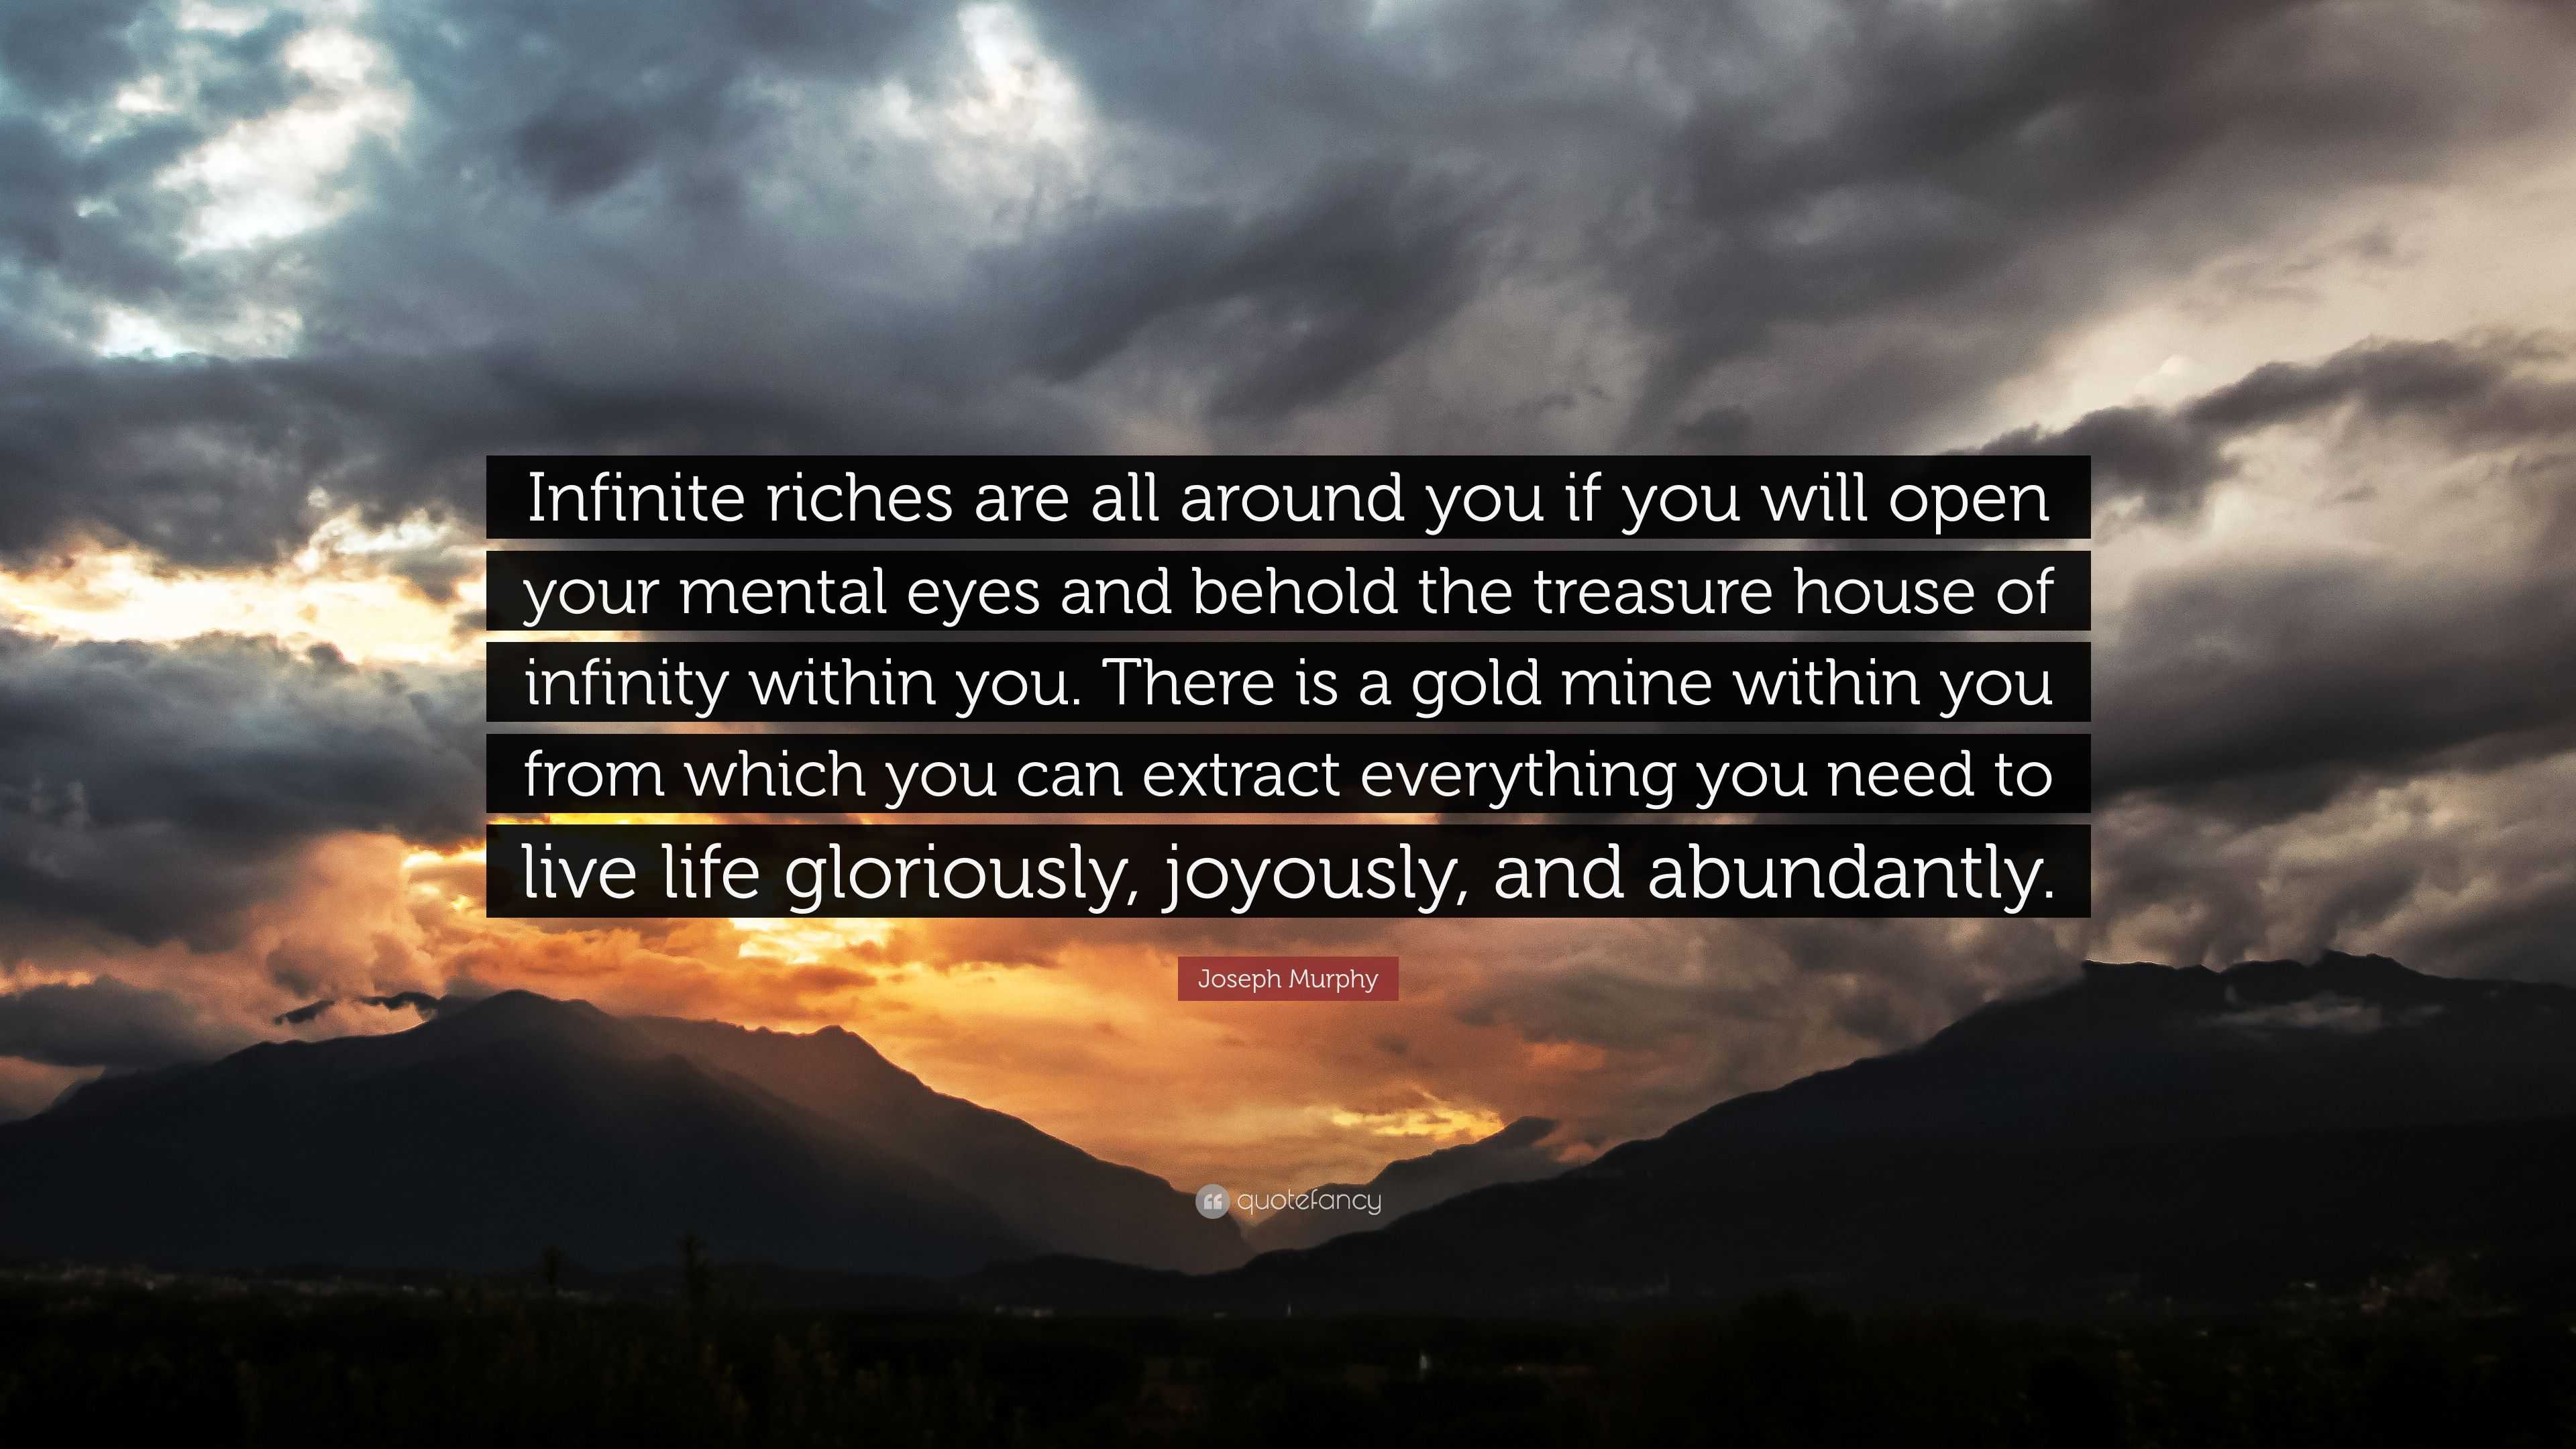 Joseph Murphy Quote “Infinite riches are all around you if you will open your